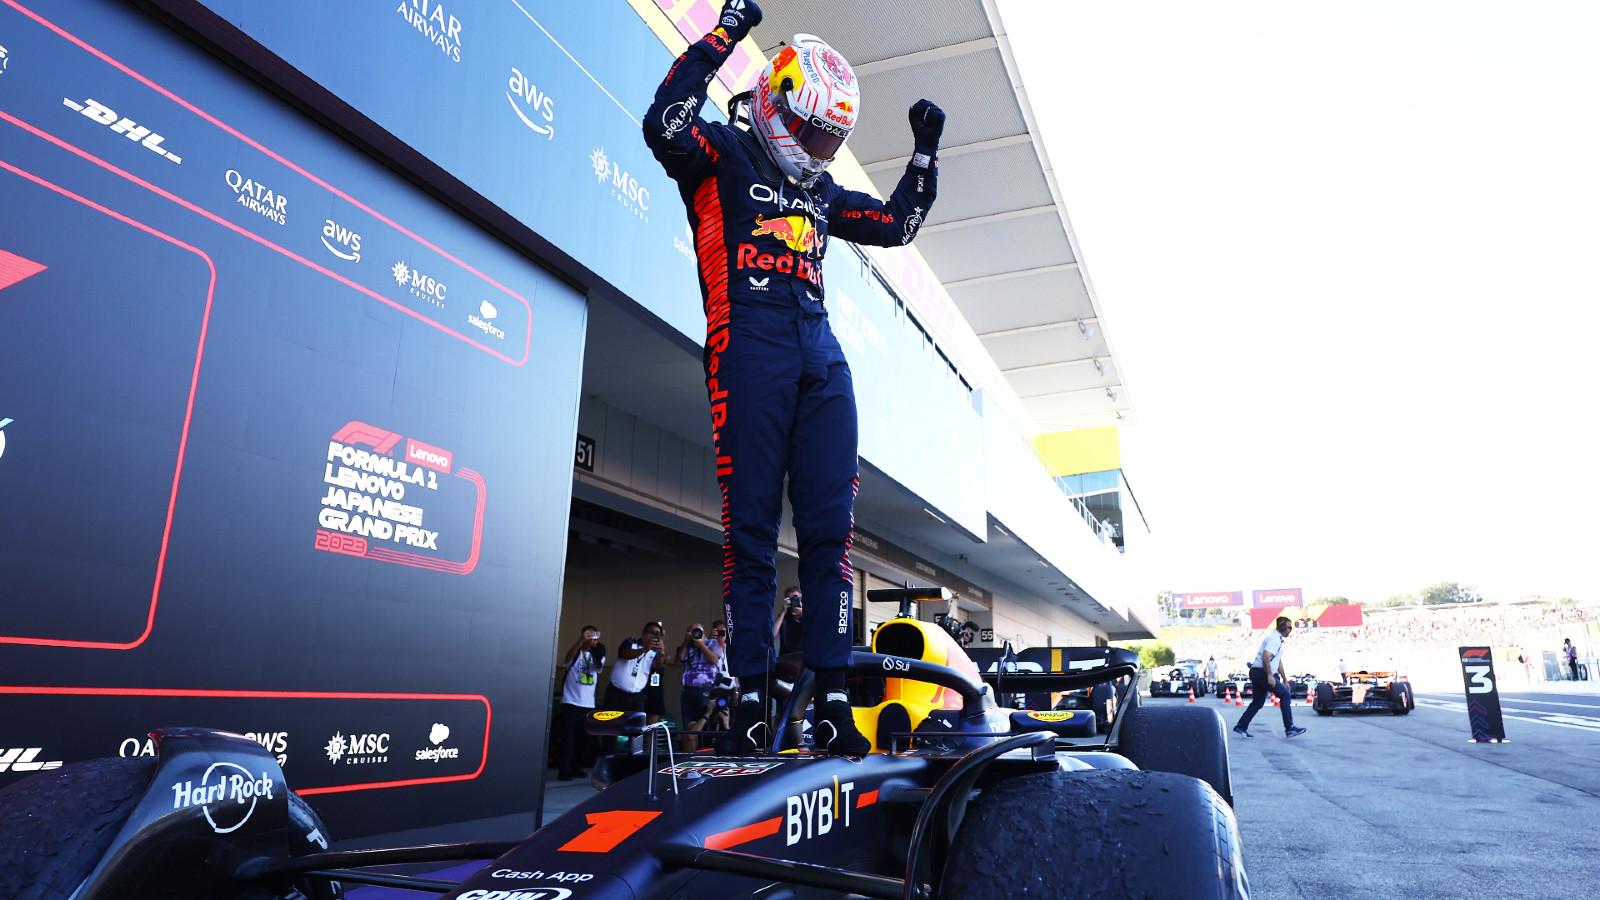 Max Verstappen on X: World Champion 2022!!! We've been absolutely